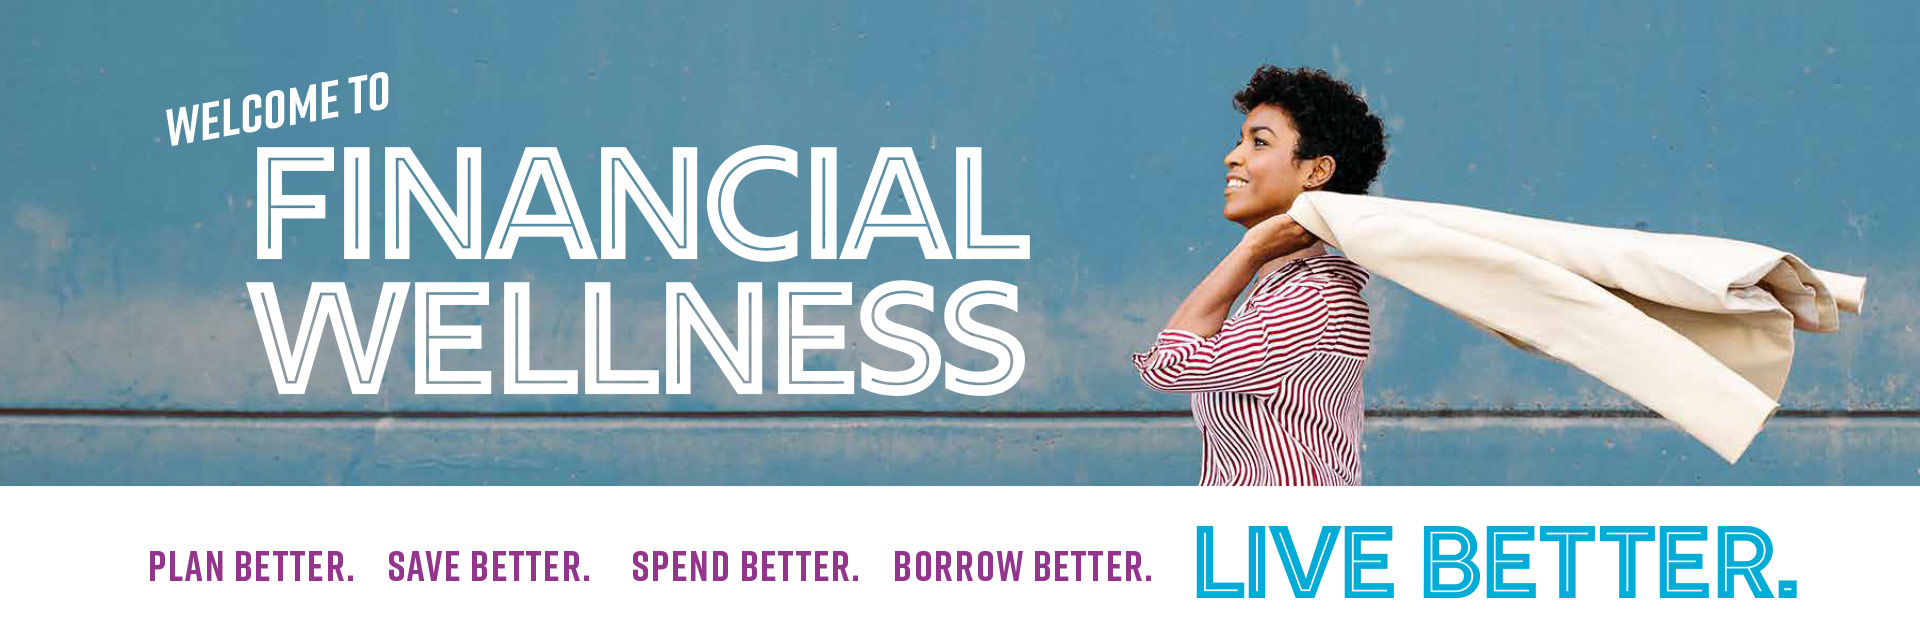 Welcome to Financial Wellness. Plan, Save, Spend, Borrow. Live better.